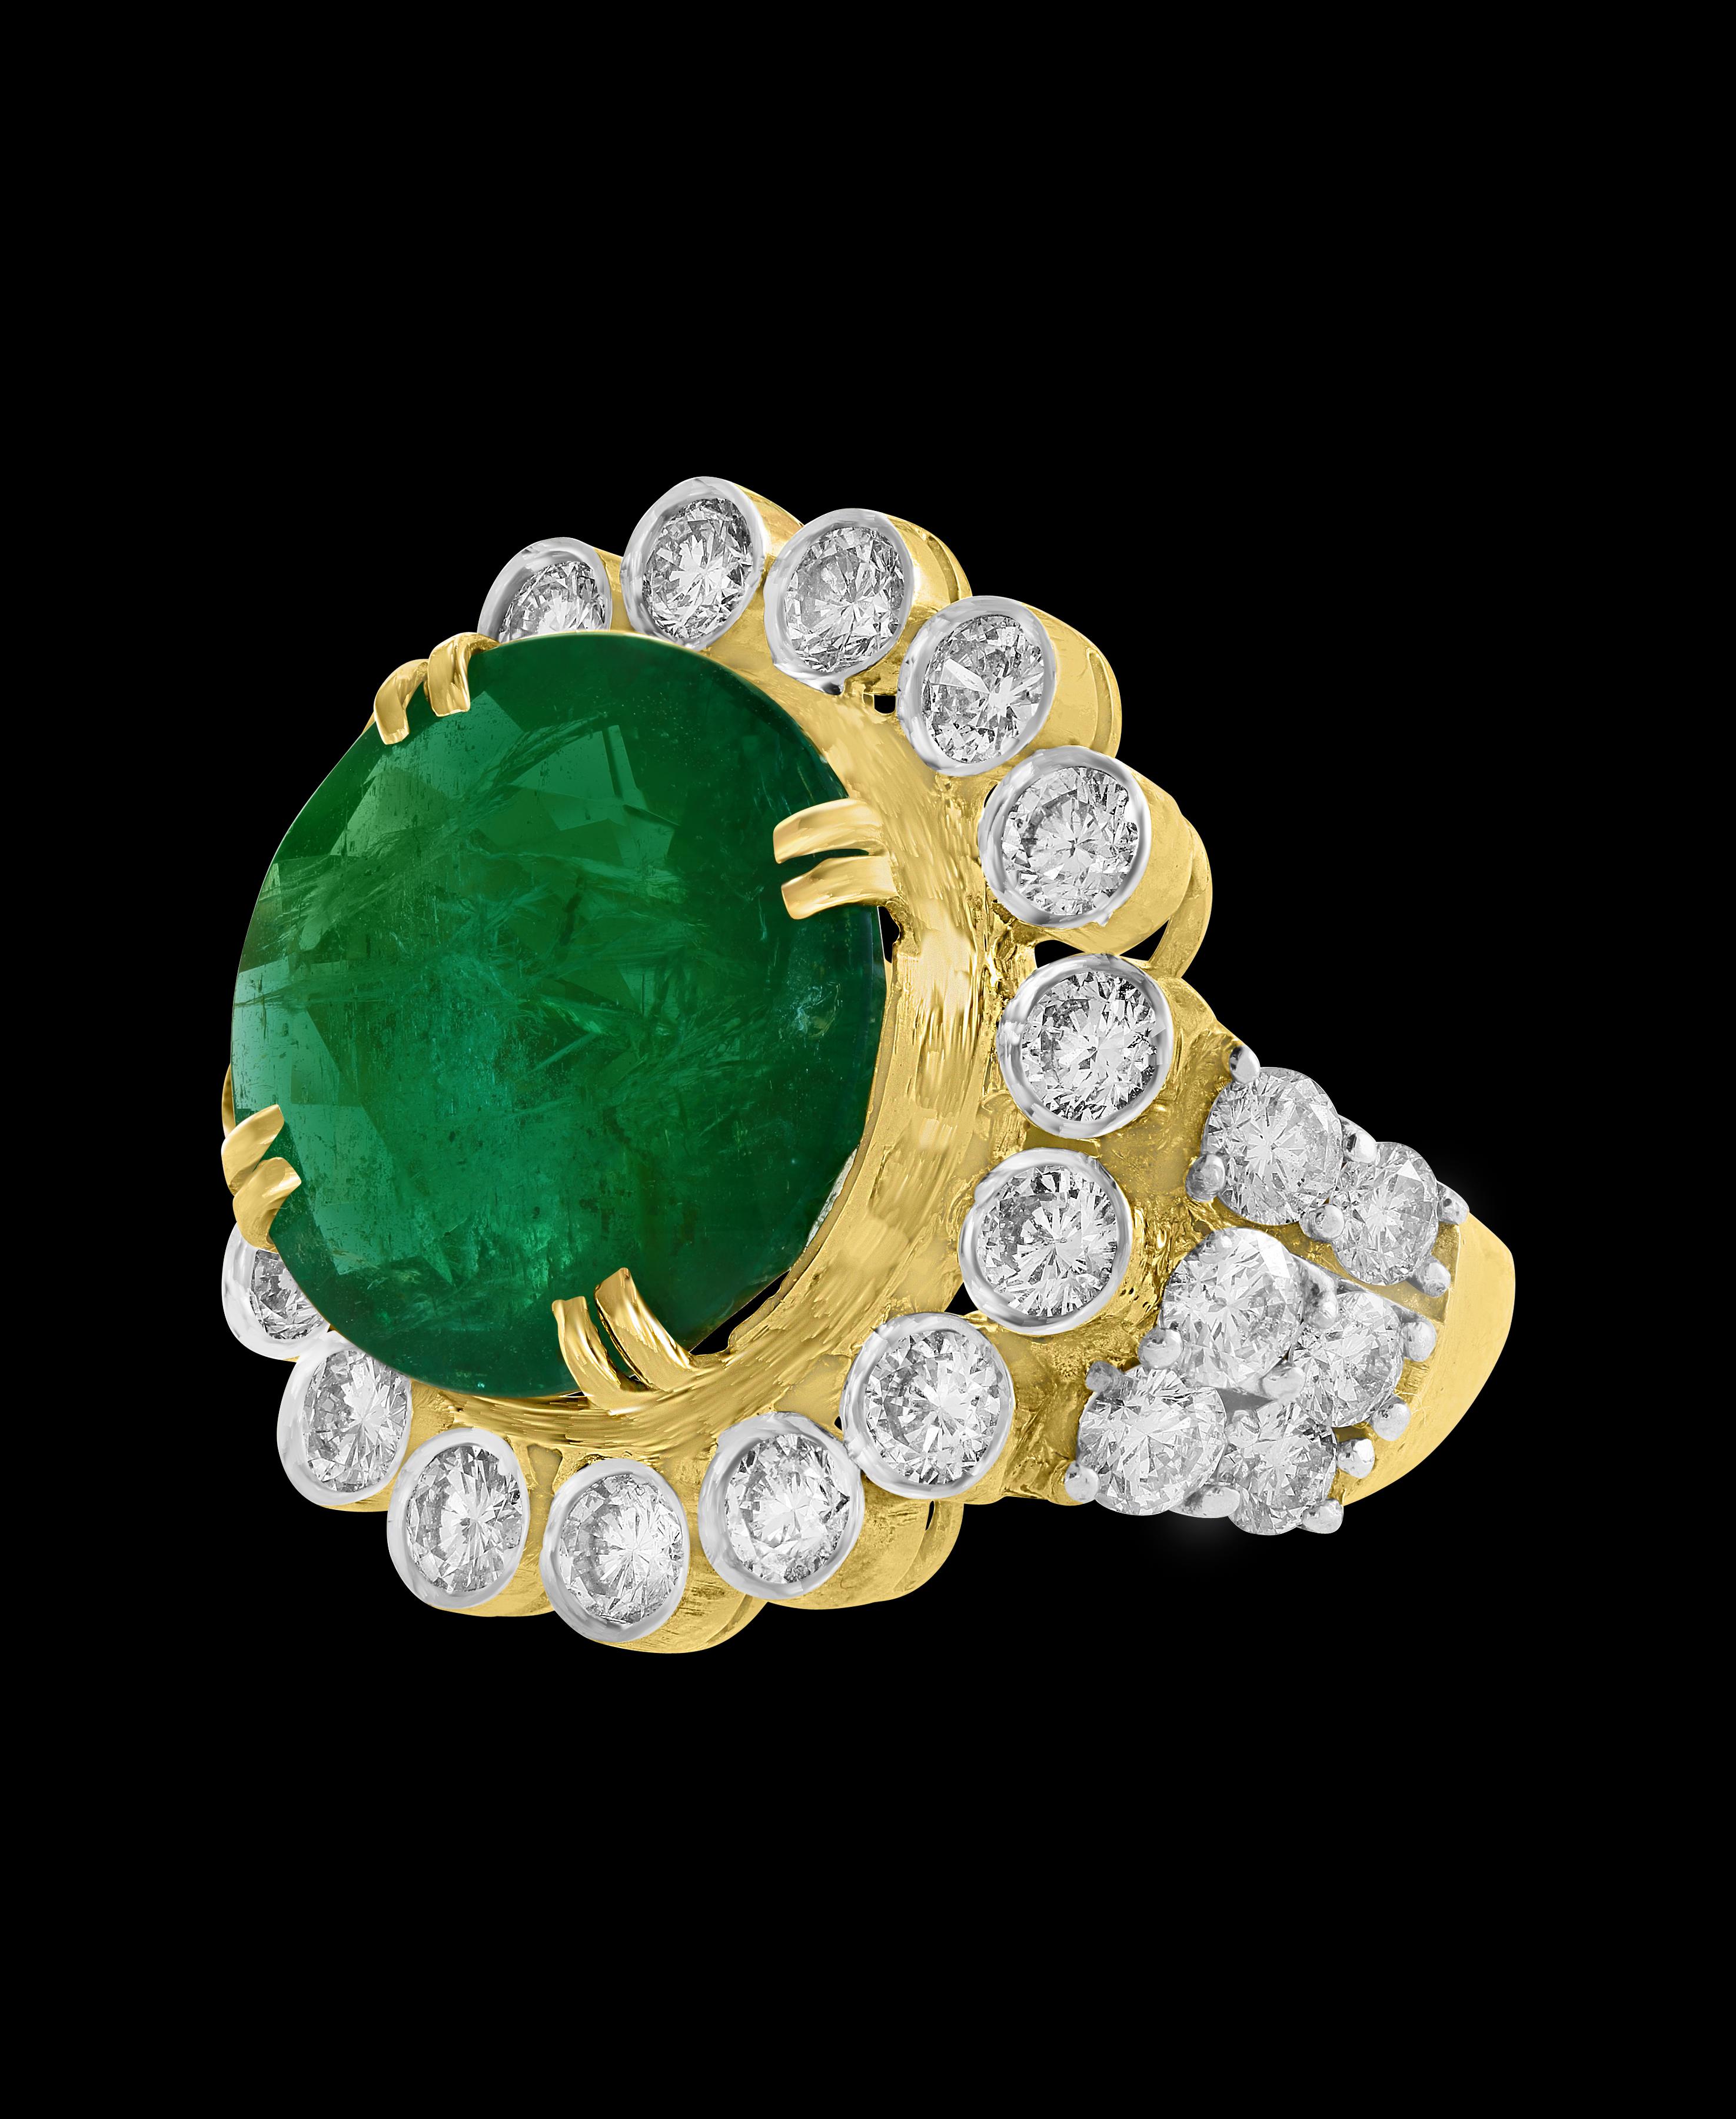 9.8 Carat Round Colombian Emerald and Diamond 18 Karat Gold Ring, Estate In Excellent Condition For Sale In New York, NY